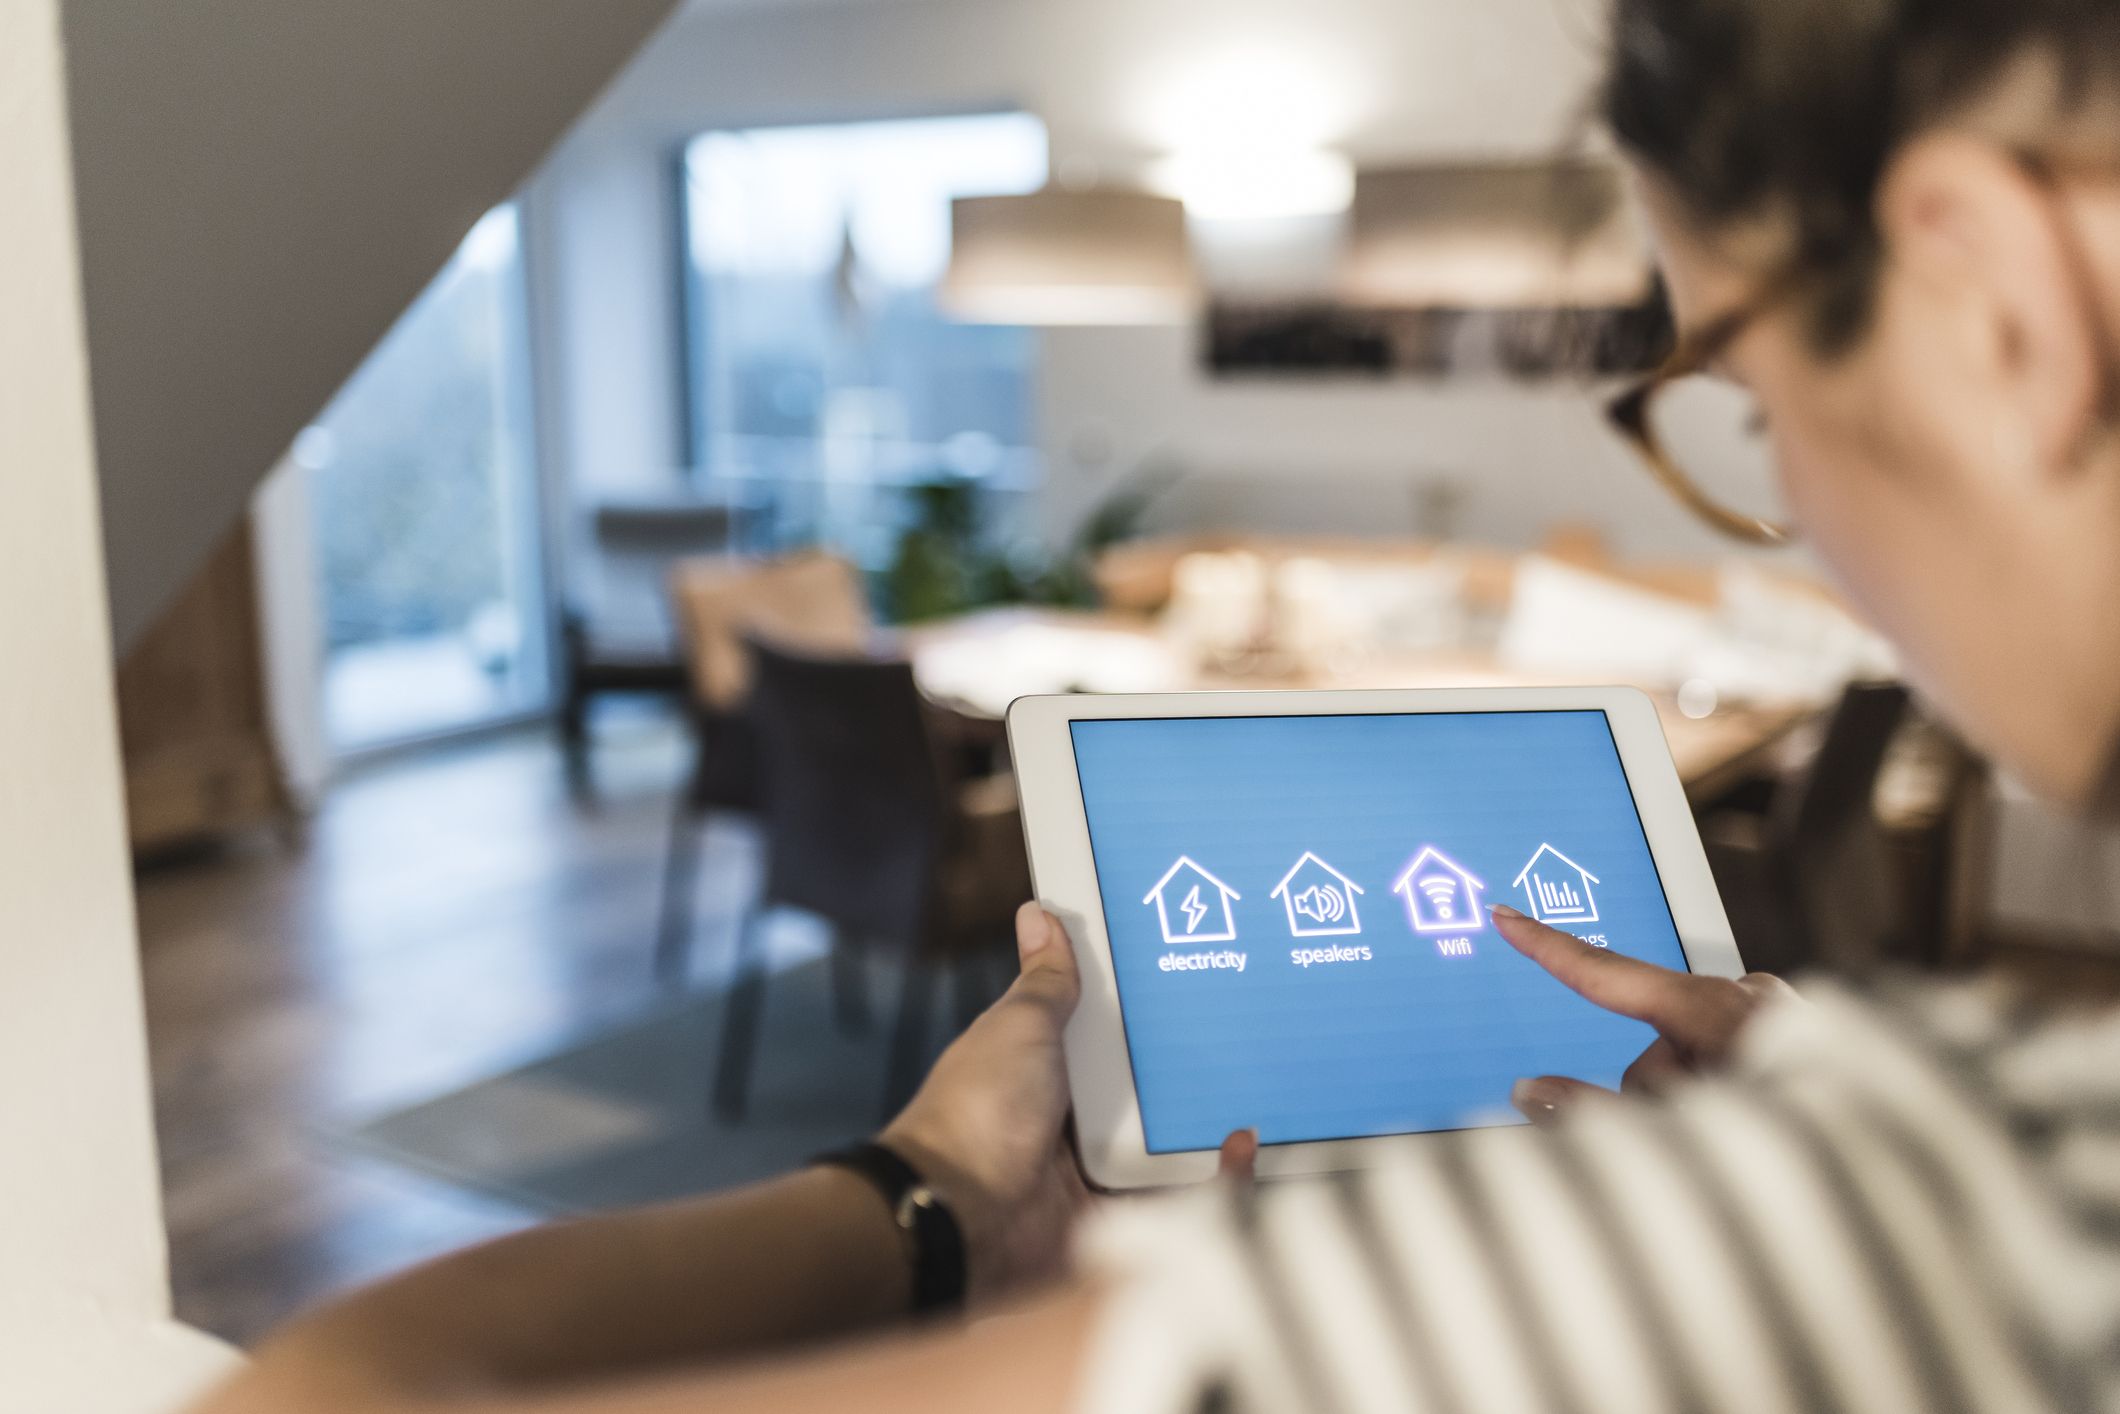 15 Best Smart Home Technology in 2018 - Smart Home Solutions at Every Price